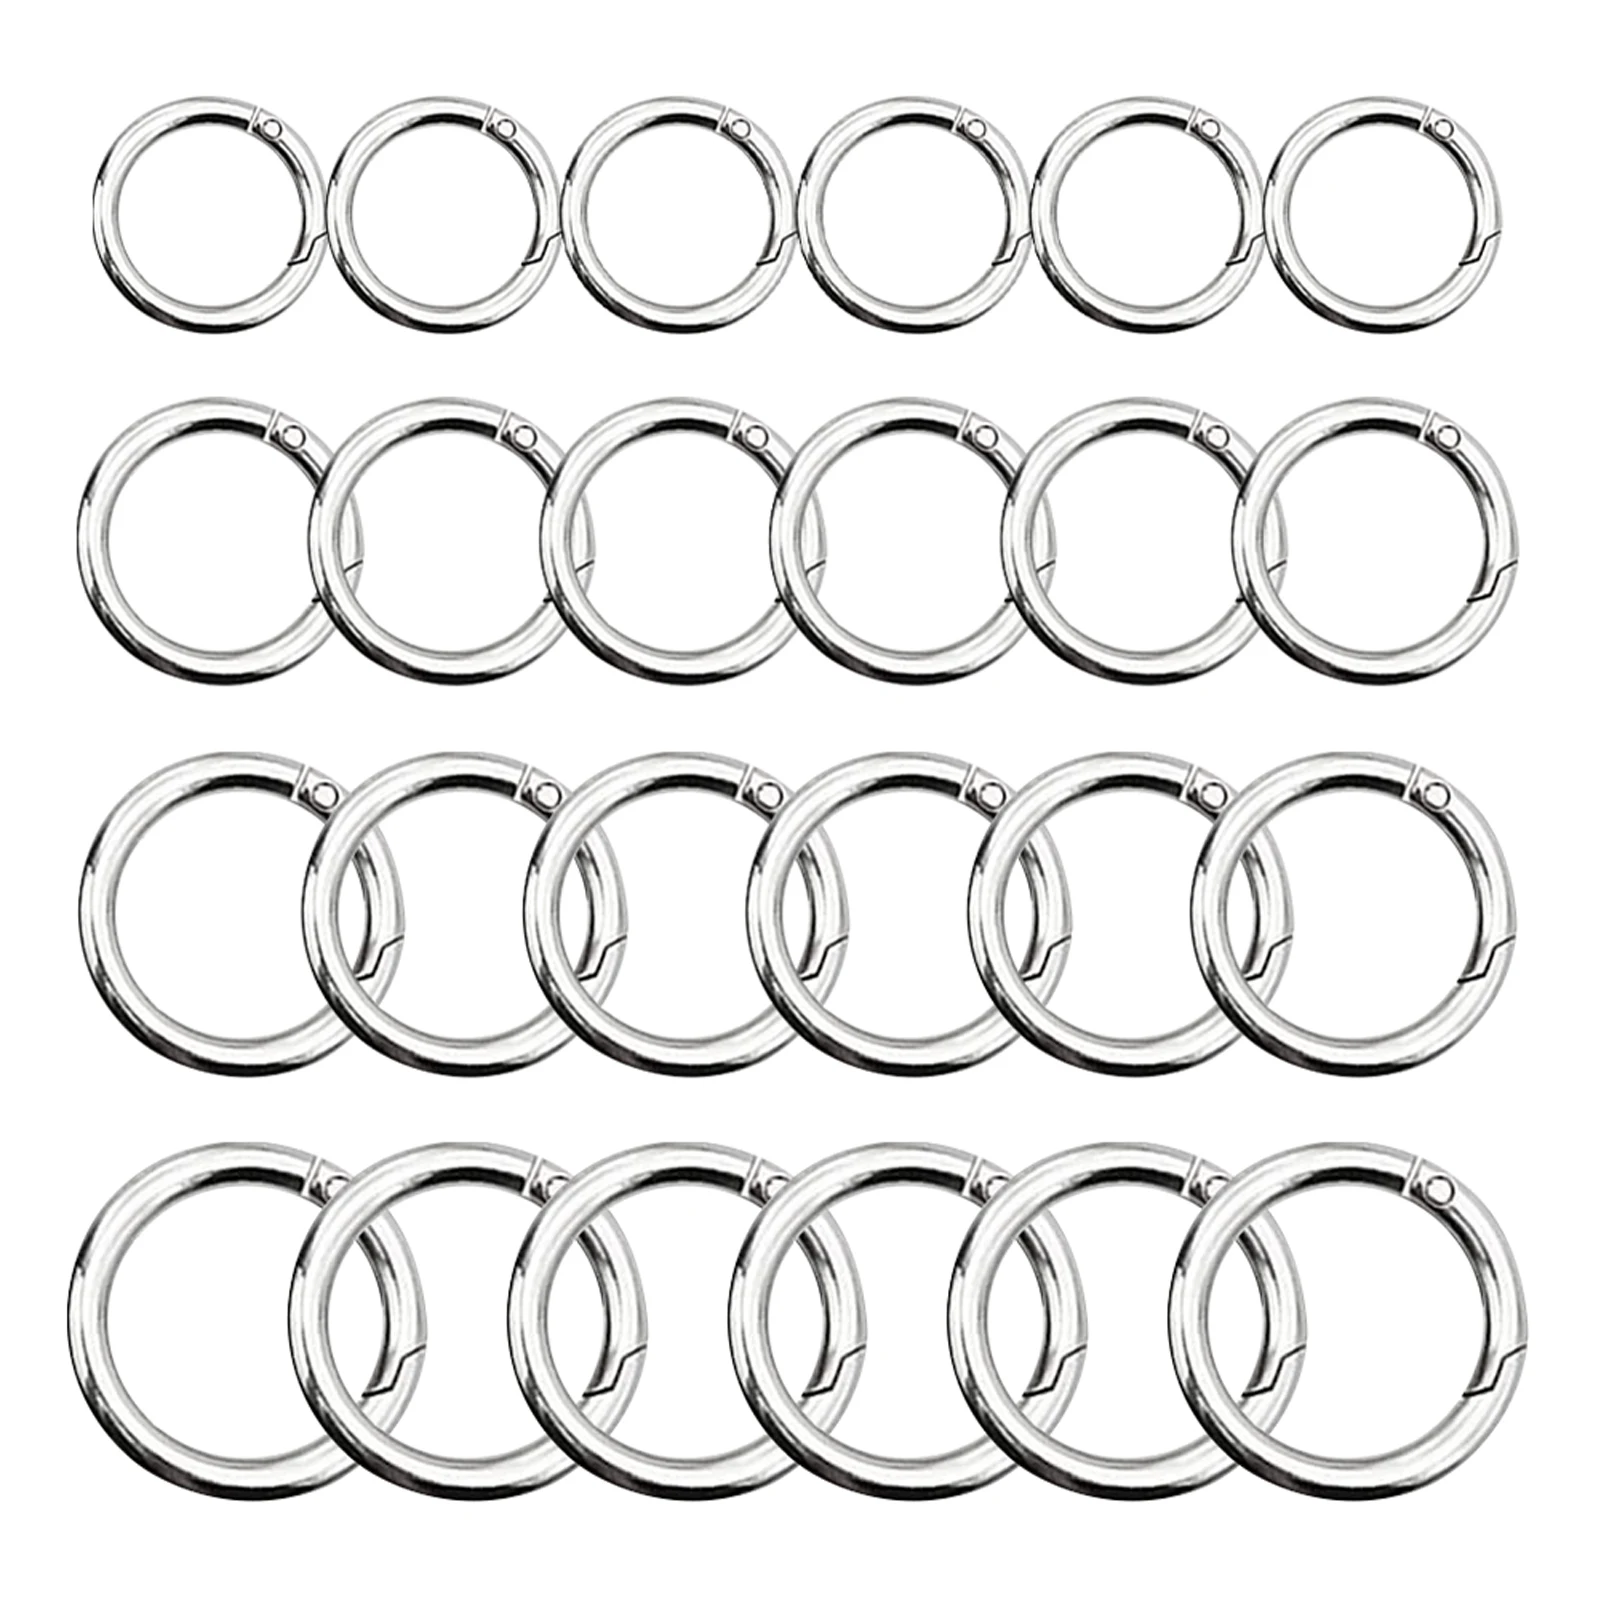 

24pcs Purse Zinc Alloy Backpacks Round Carabiner 20 25 28 35MM Buckle Handbags Hiking DIY Accessories Hand Craft For Key Rings